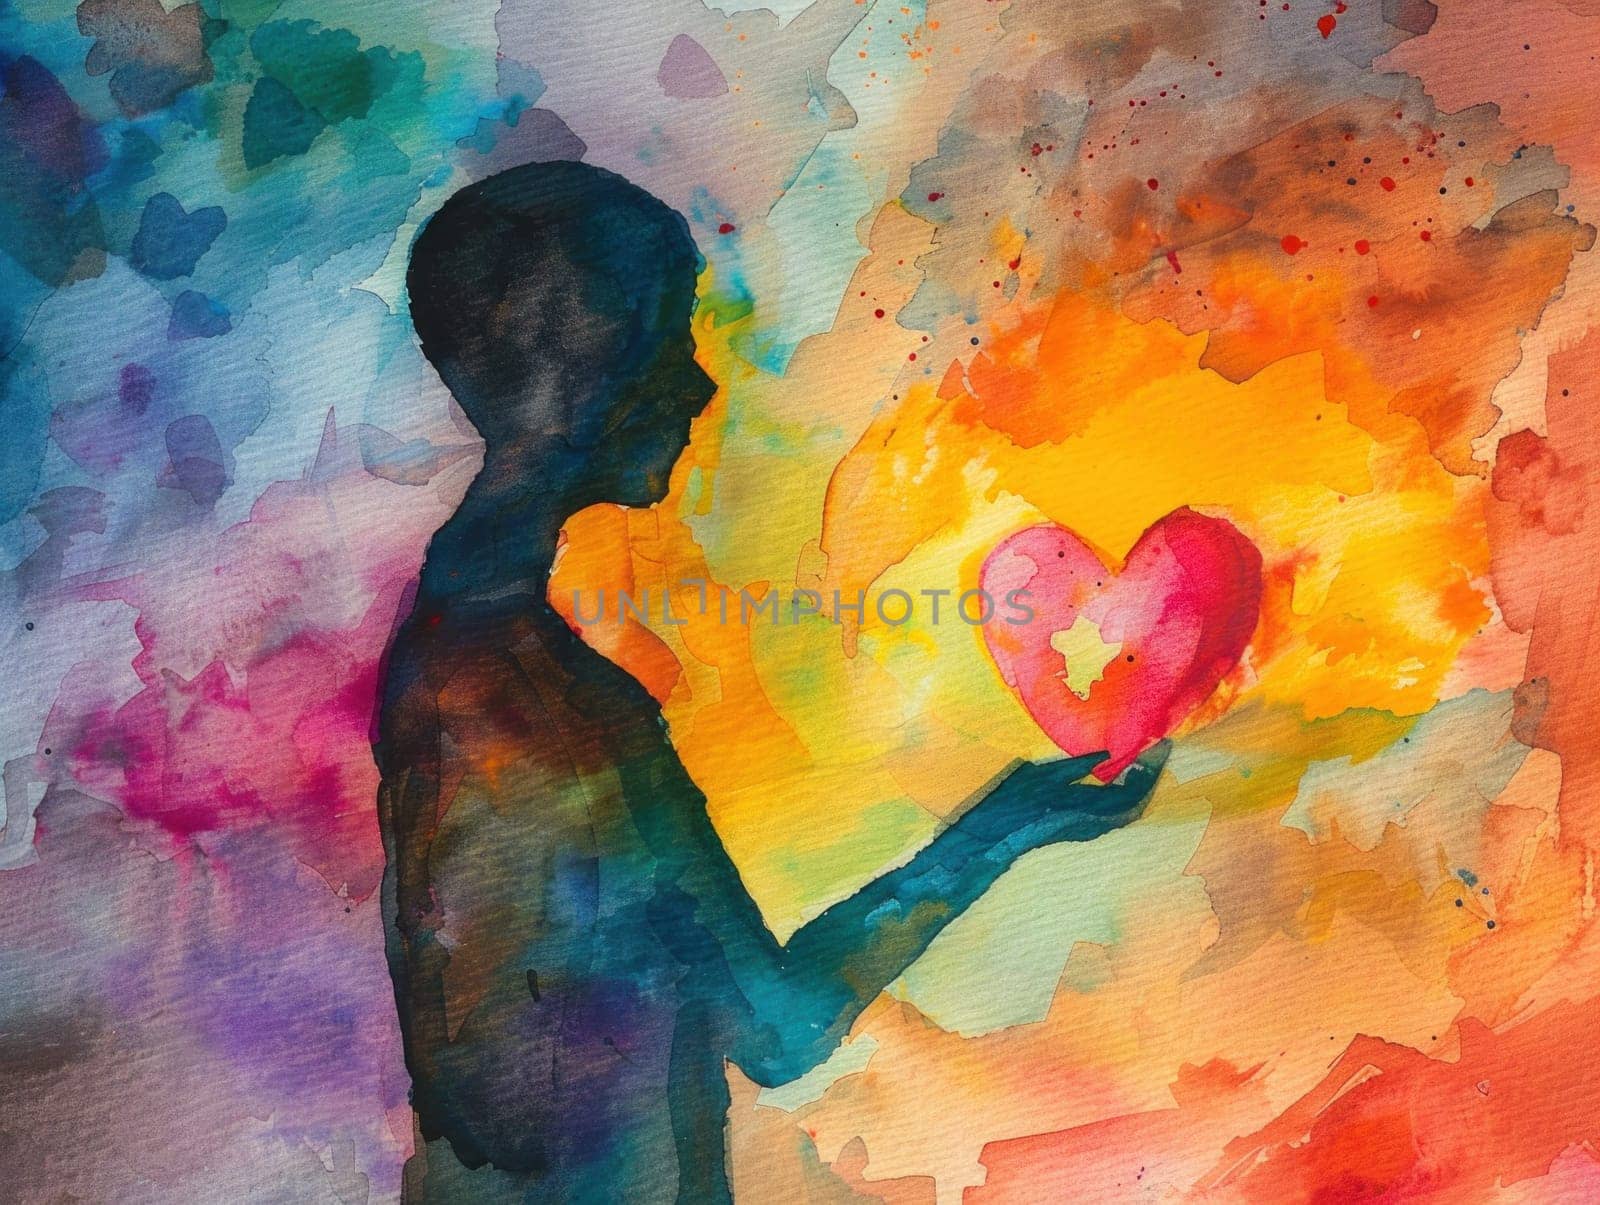 Watercolor painting of a person holding a heart in front of a colorful background as symbol of love and artistry by Vichizh